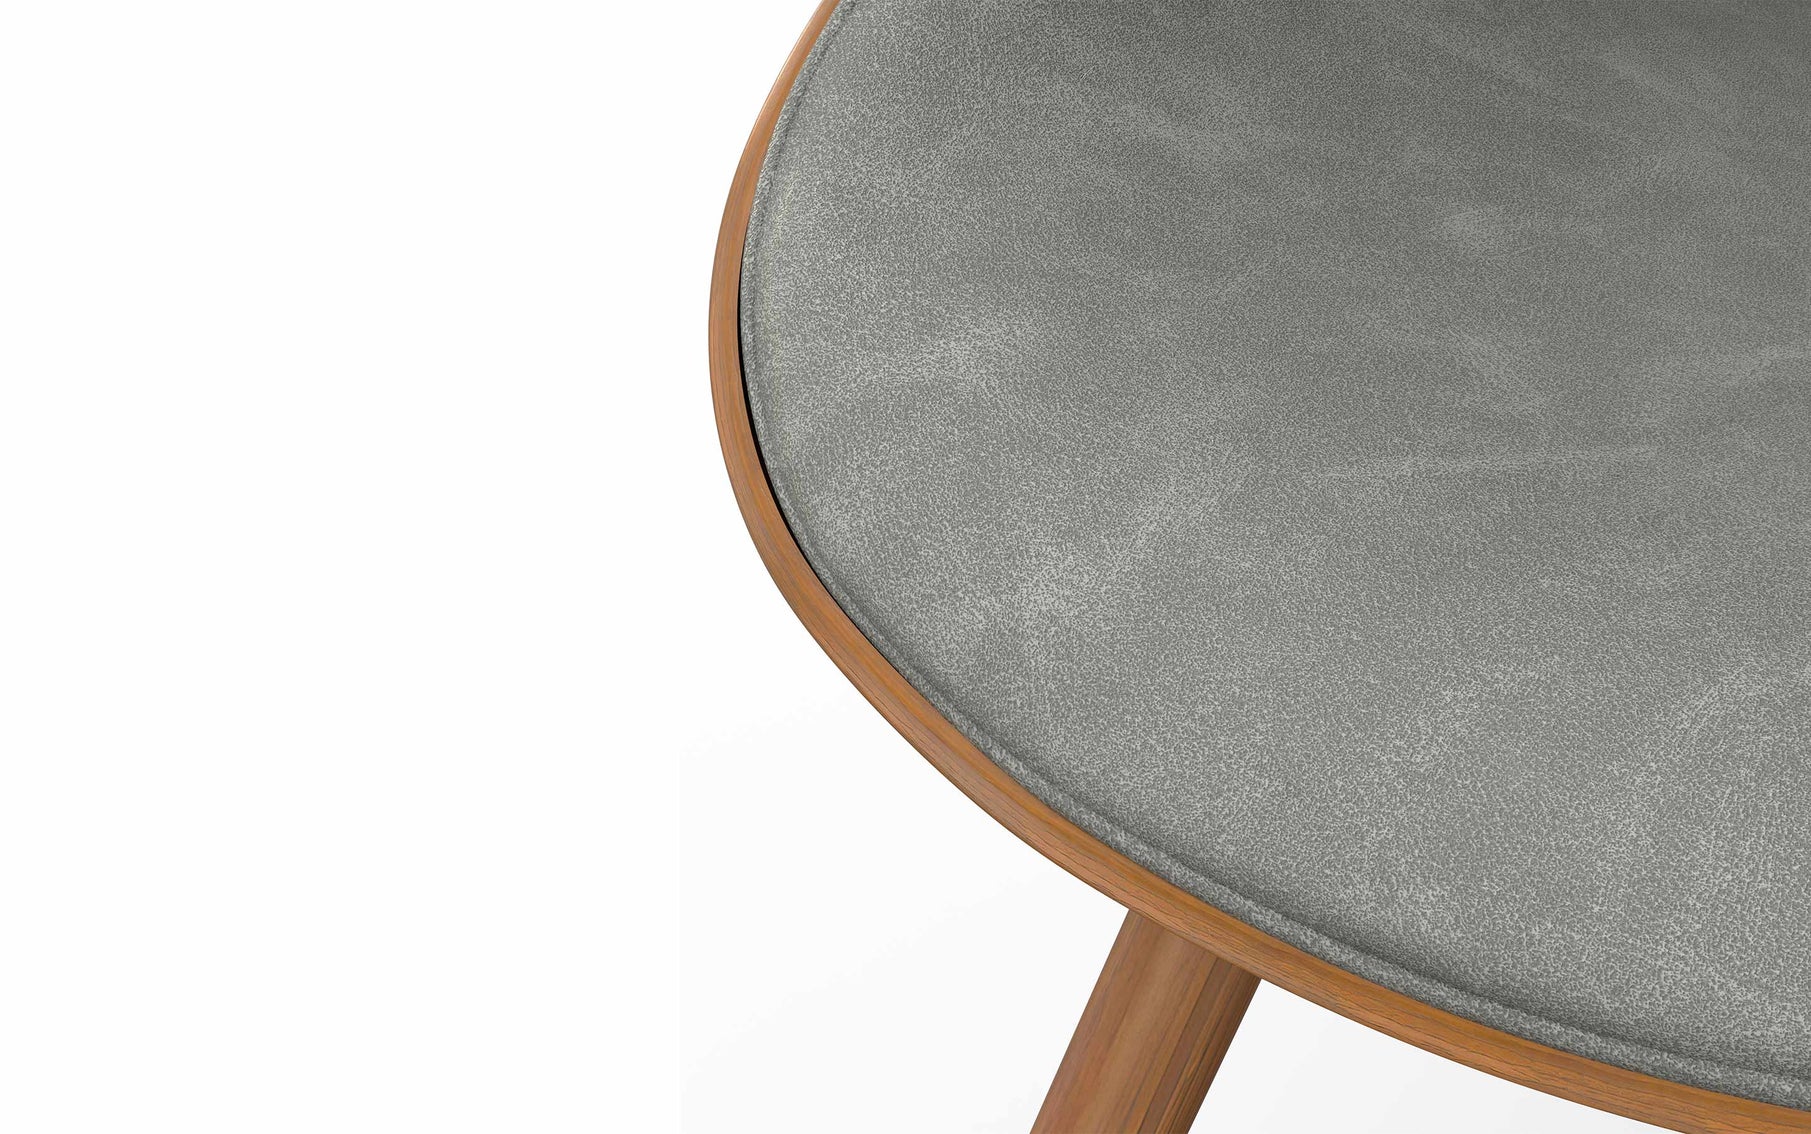 Distressed Grey Walnut Distressed Vegan Leather | Malden Dining Chair with Wood Back